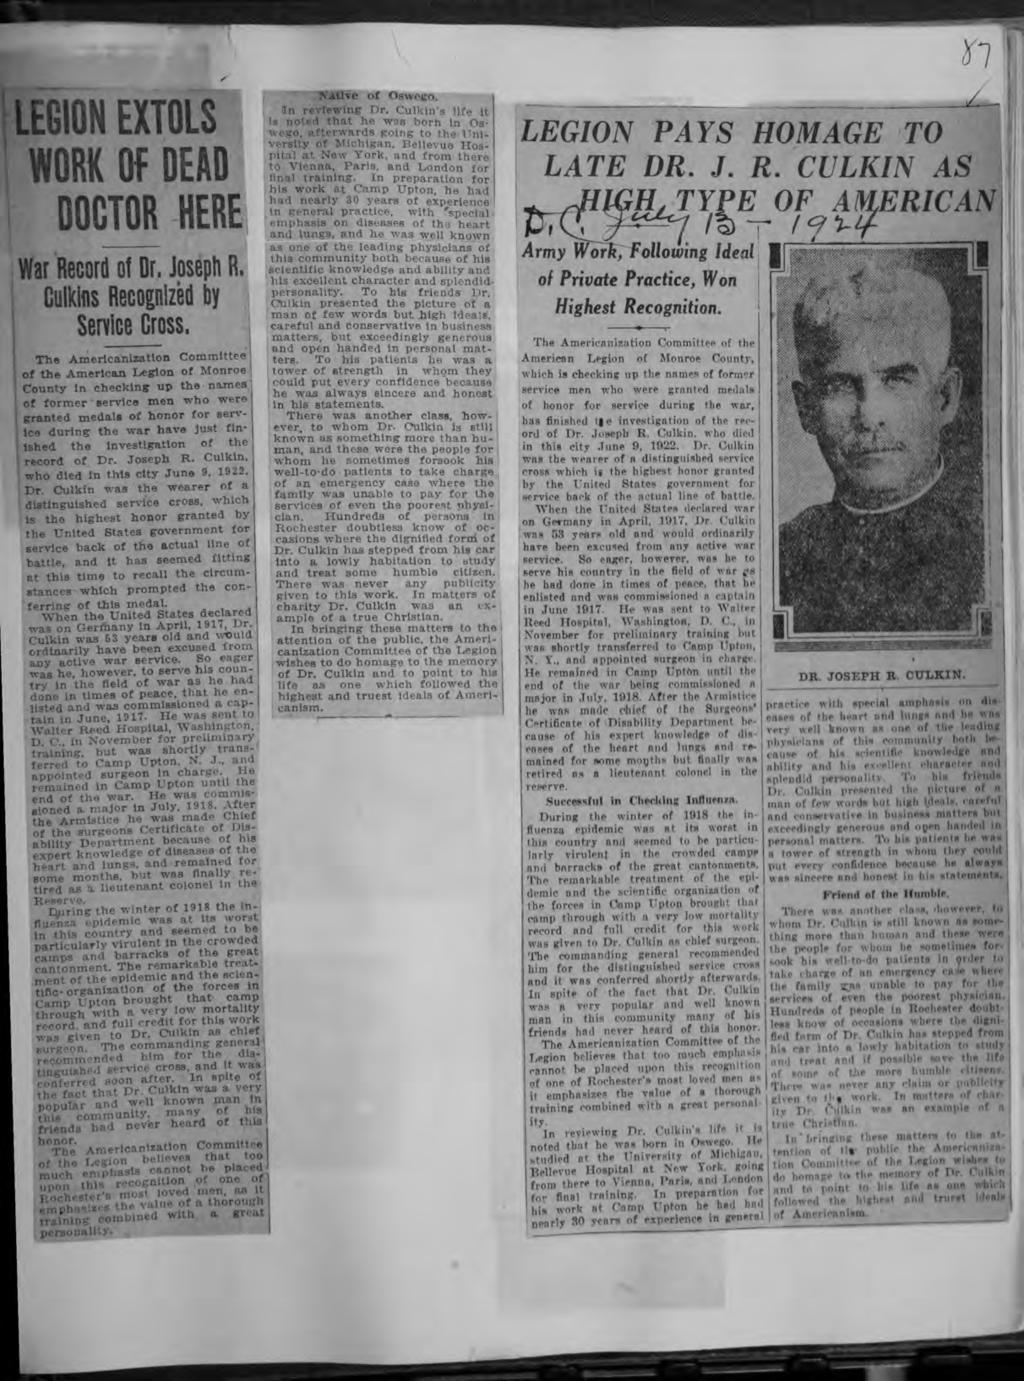 " n LEGON EXTOLS WORK Of DEAD DOCTOR HERE War Record of Dr Joseph Rs Culkns Recognzed by Servce Gross The Amercanzaton Commttee of the Amercan Legon of Monroe County ln checkng up the names of former